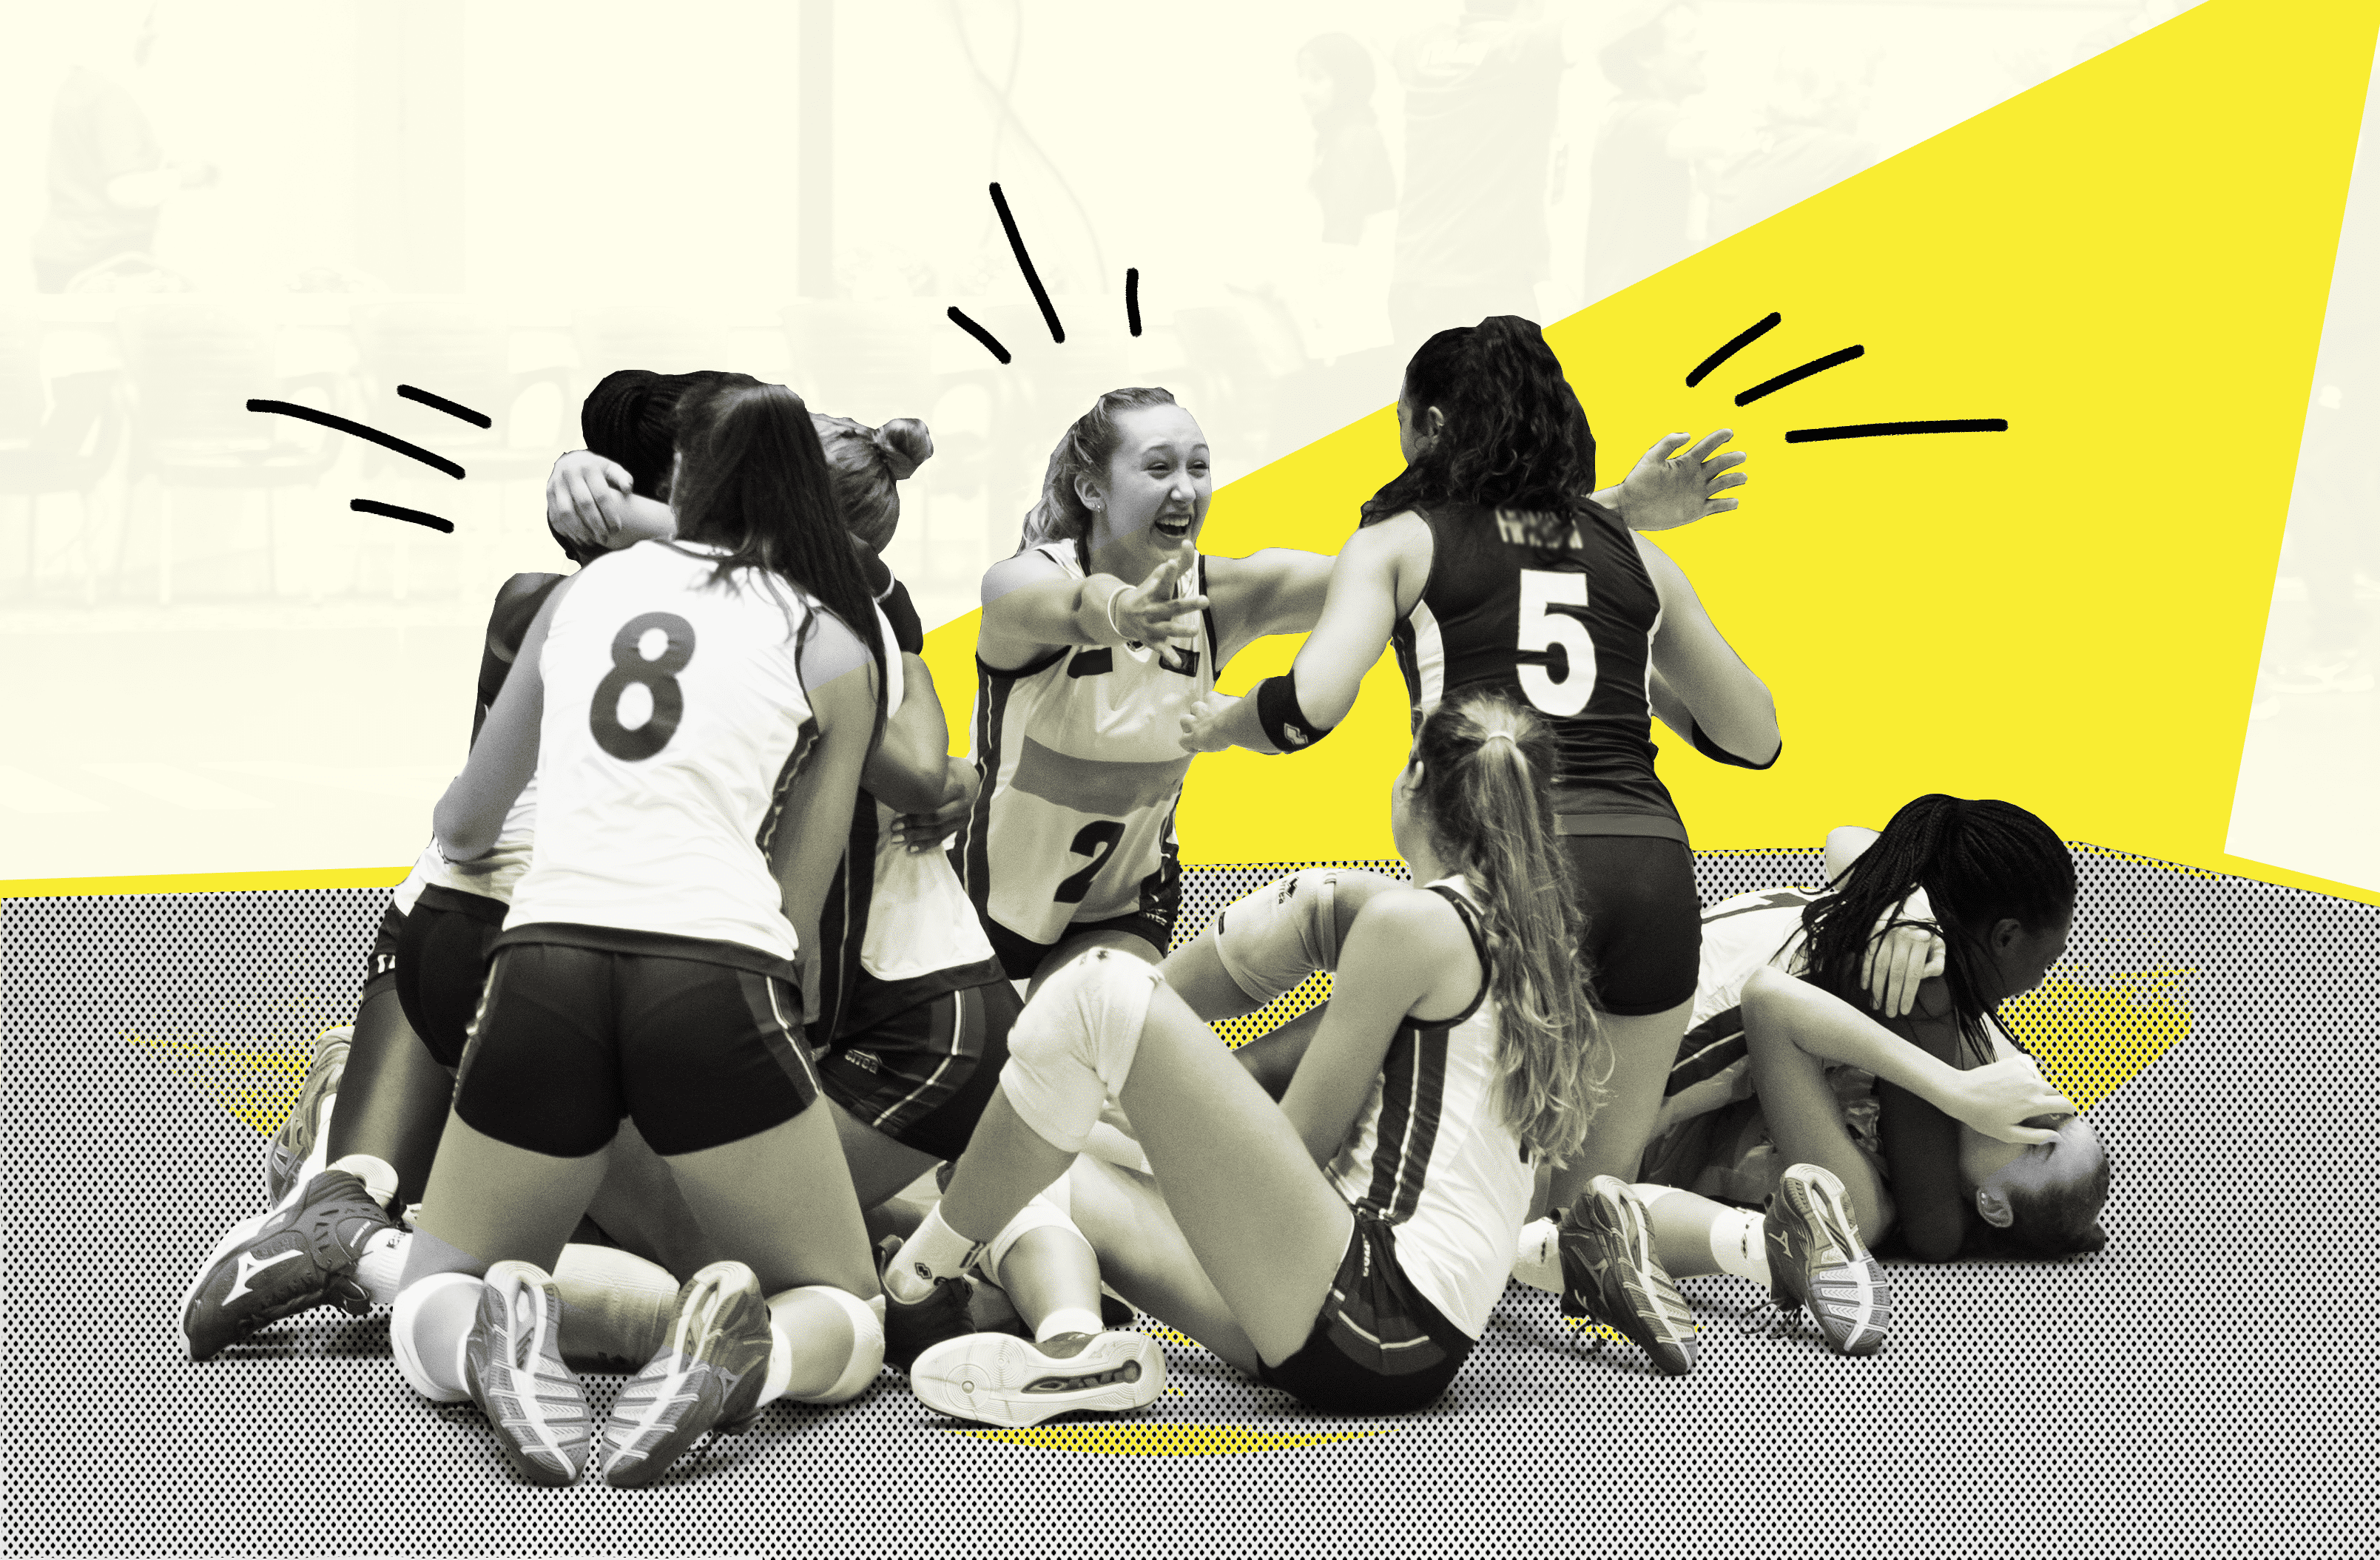 Unleash Your Volleyball Club's Potential: How Digital Marketing Can Attract Top Talent and Make Your Club one of the Best in the Country!